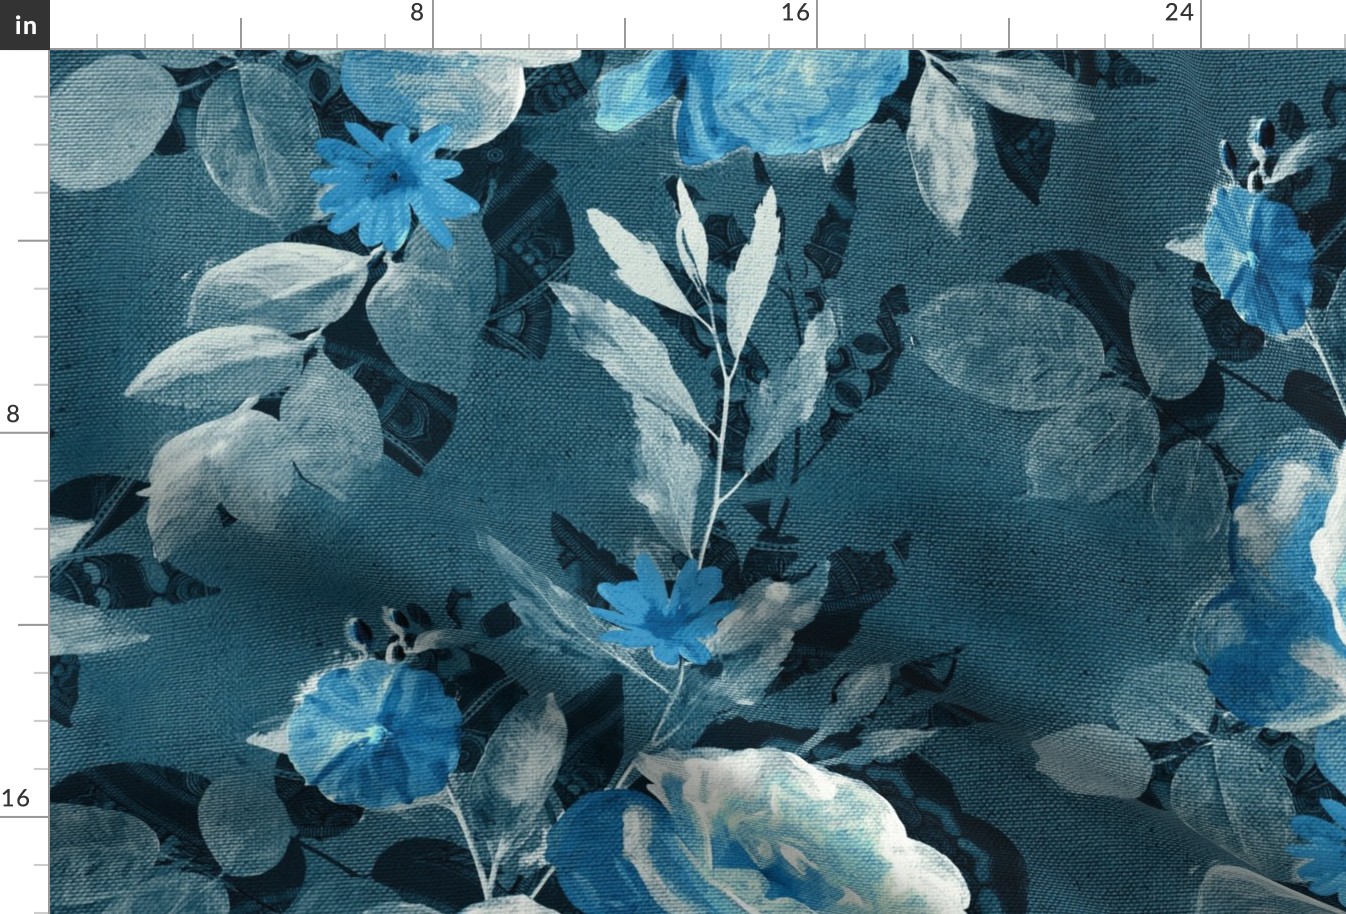 Over-sized Retro Rose Chintz in Monochrome Denim and Sky Blue